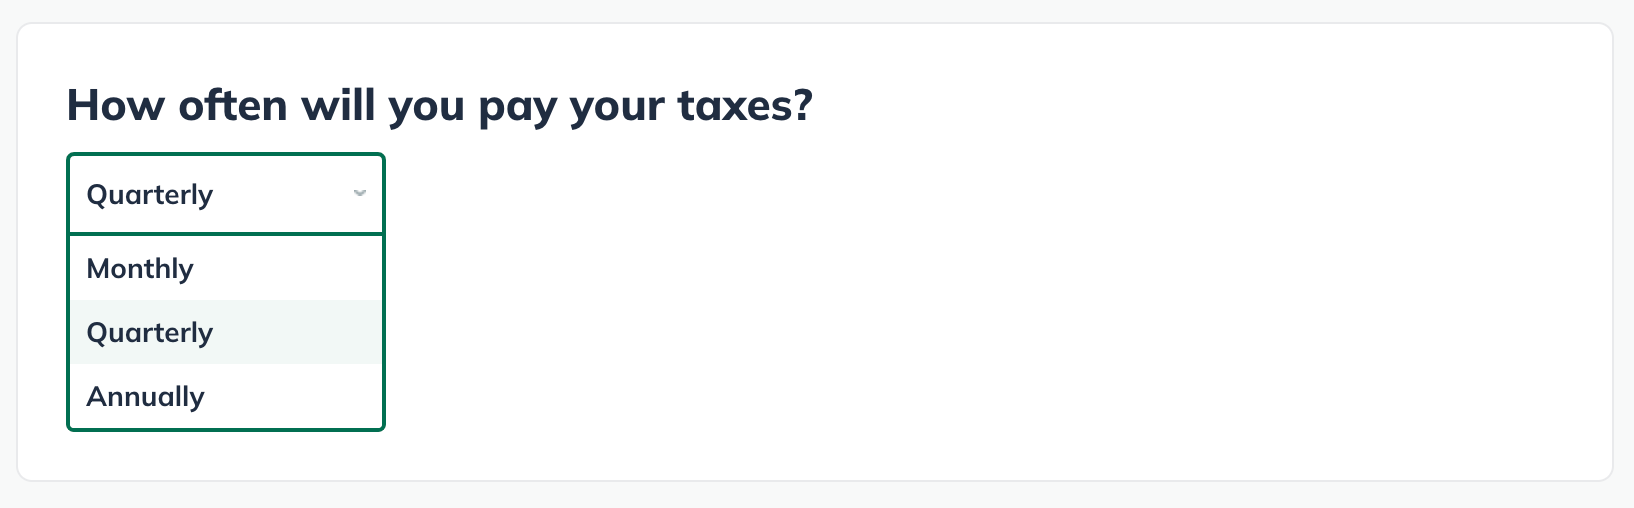 how_often_will_you_pay_your_taxes_drop_down.png